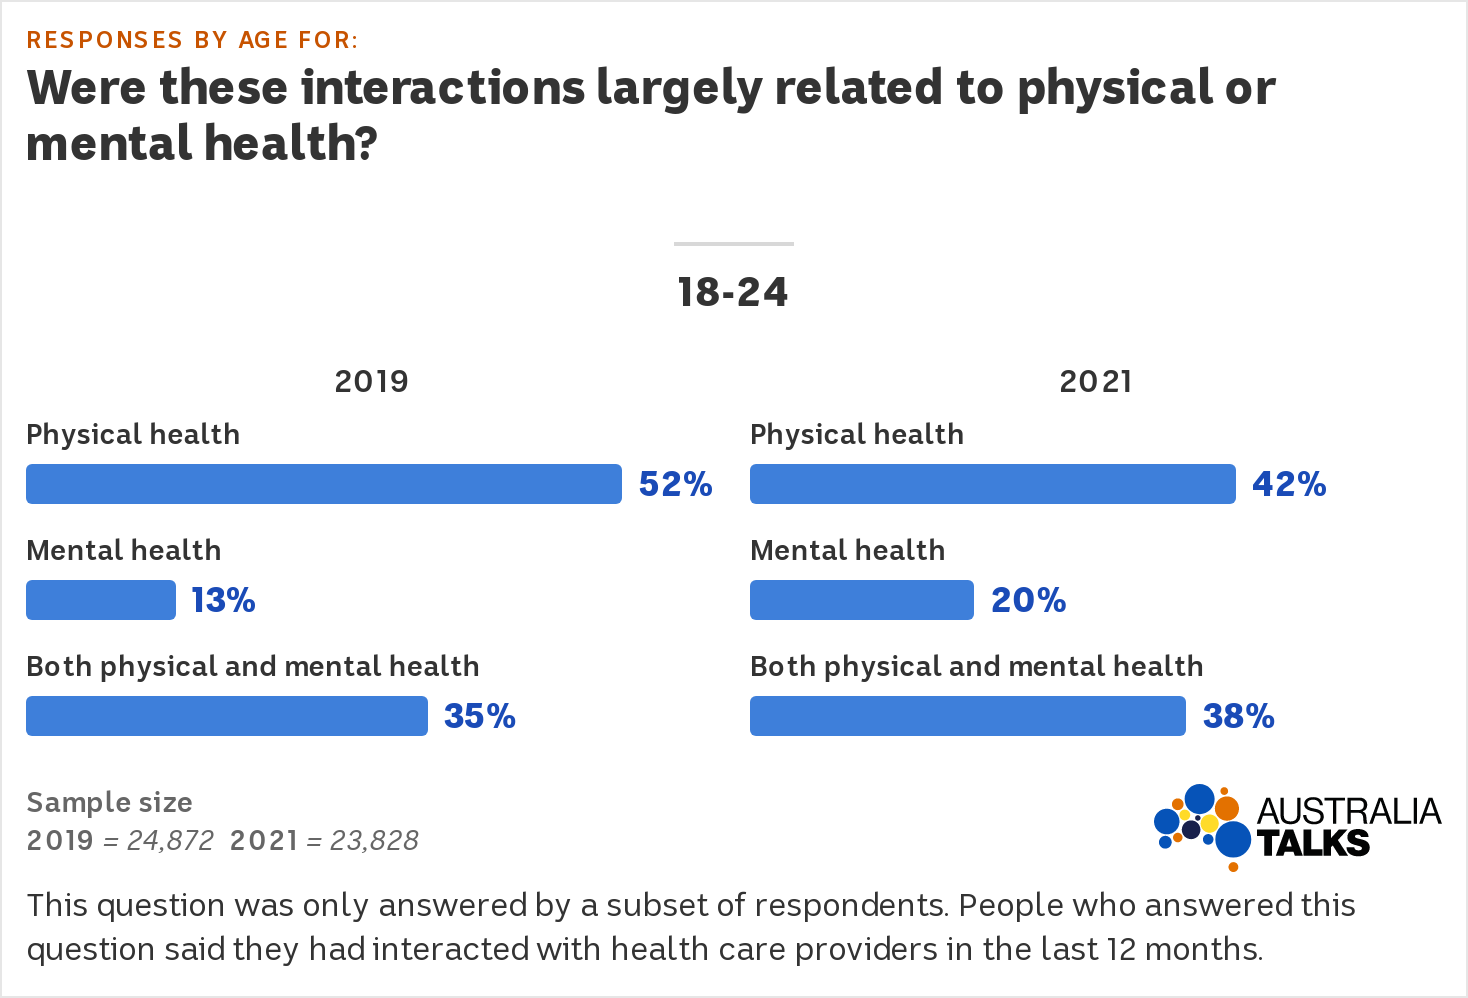 The chart shows an increase from 13% to 20% saying 'mental health' and 35% to 38% saying 'both physical and mental health'